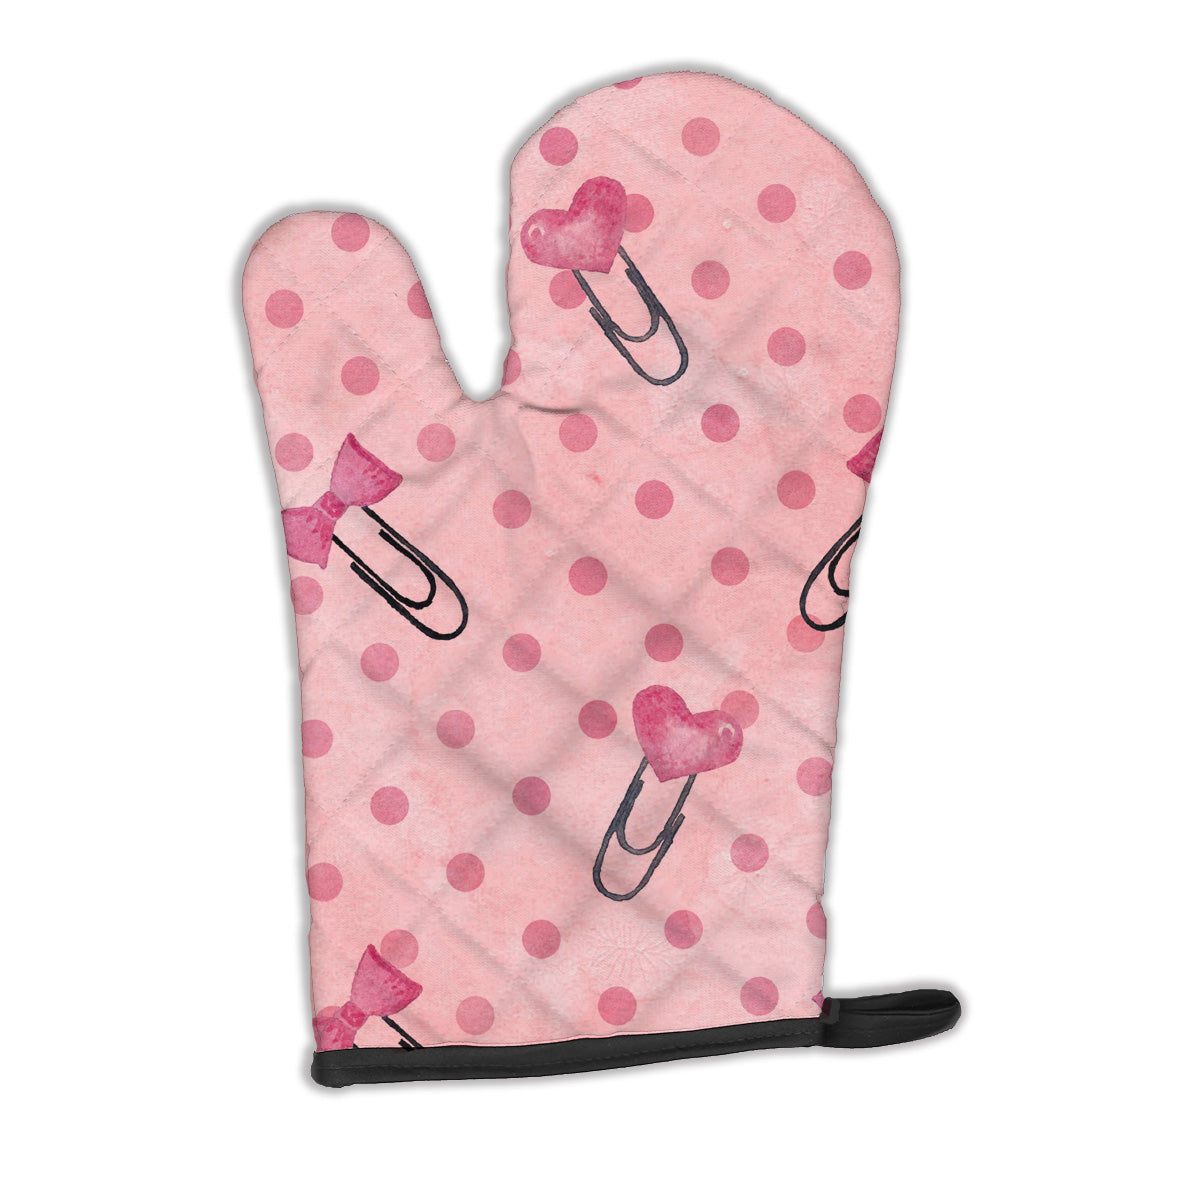 Watercolor Paper Clips and Polkadots Pink Oven Mitt BB7543OVMT